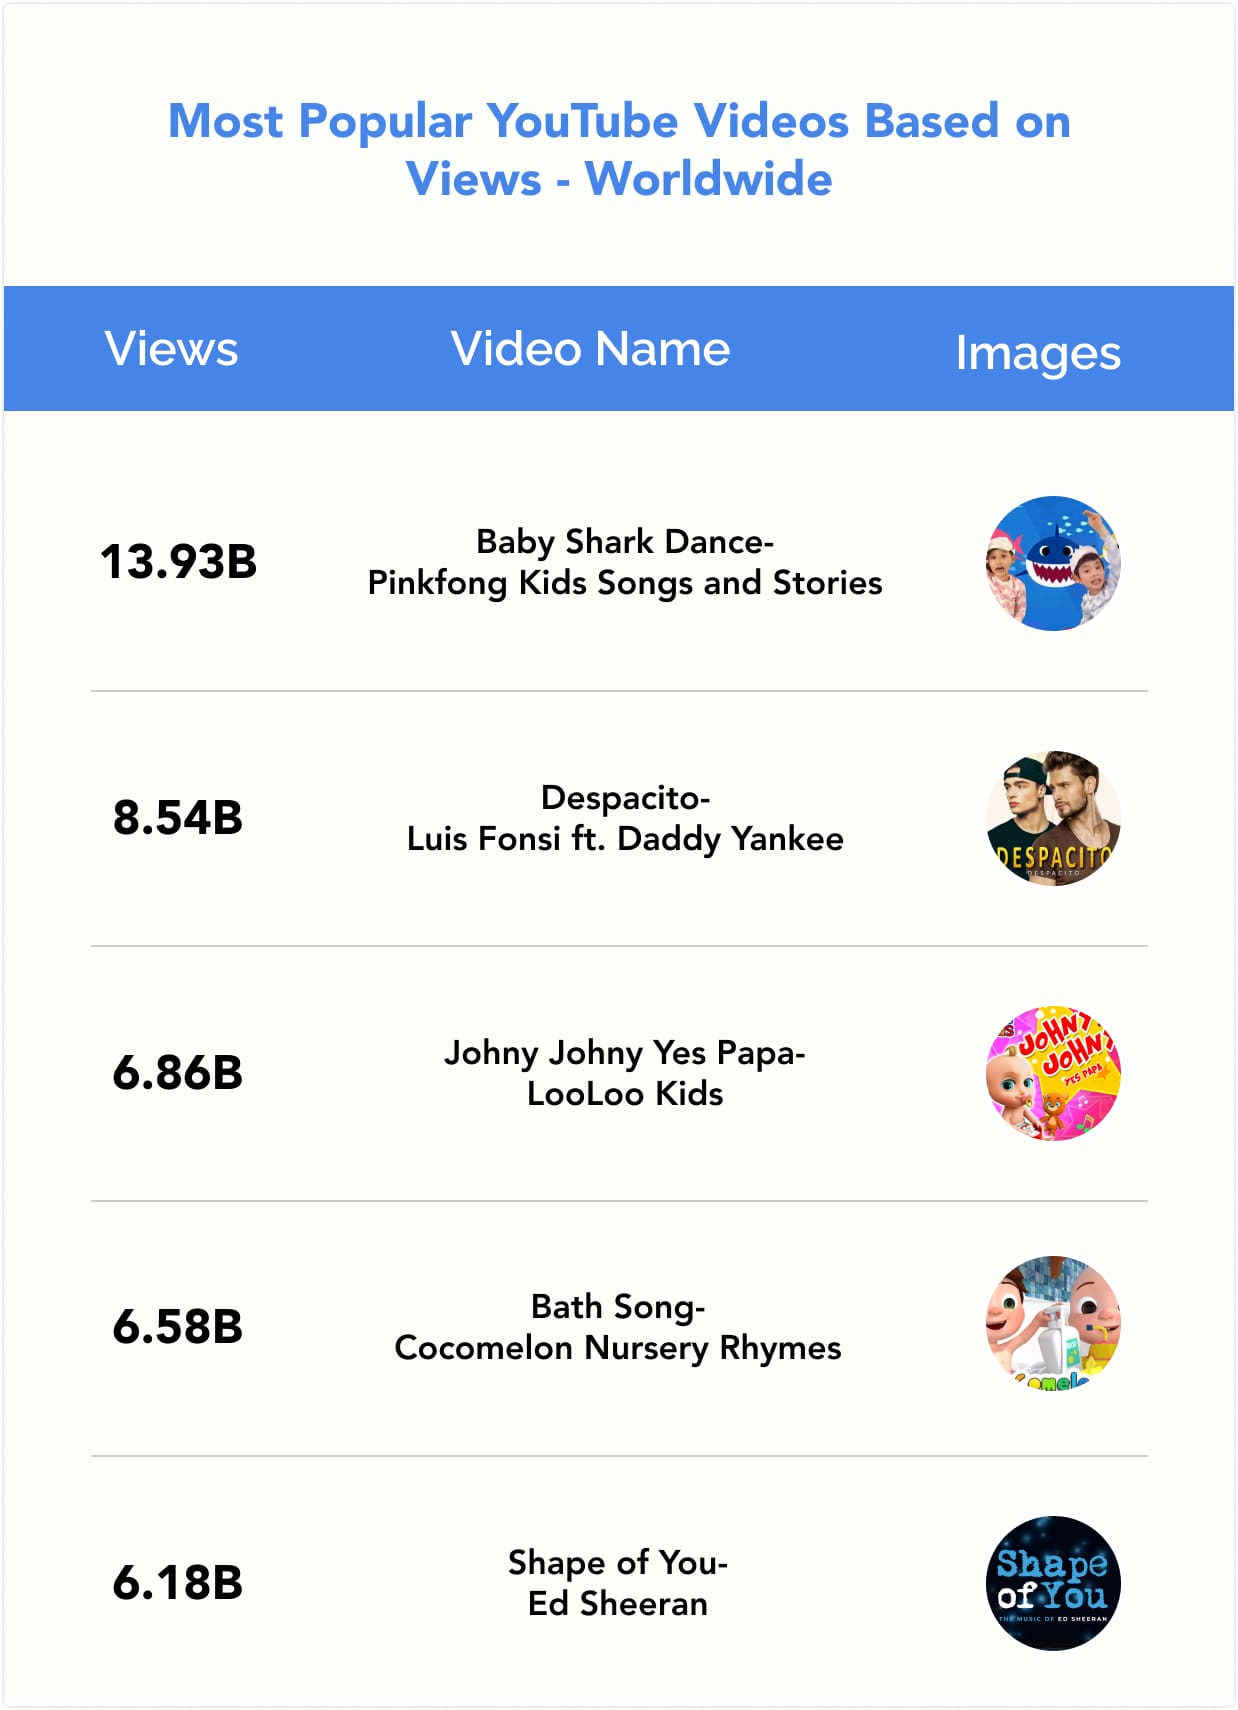 Most Popular YouTube Videos Based on Views - Worldwide